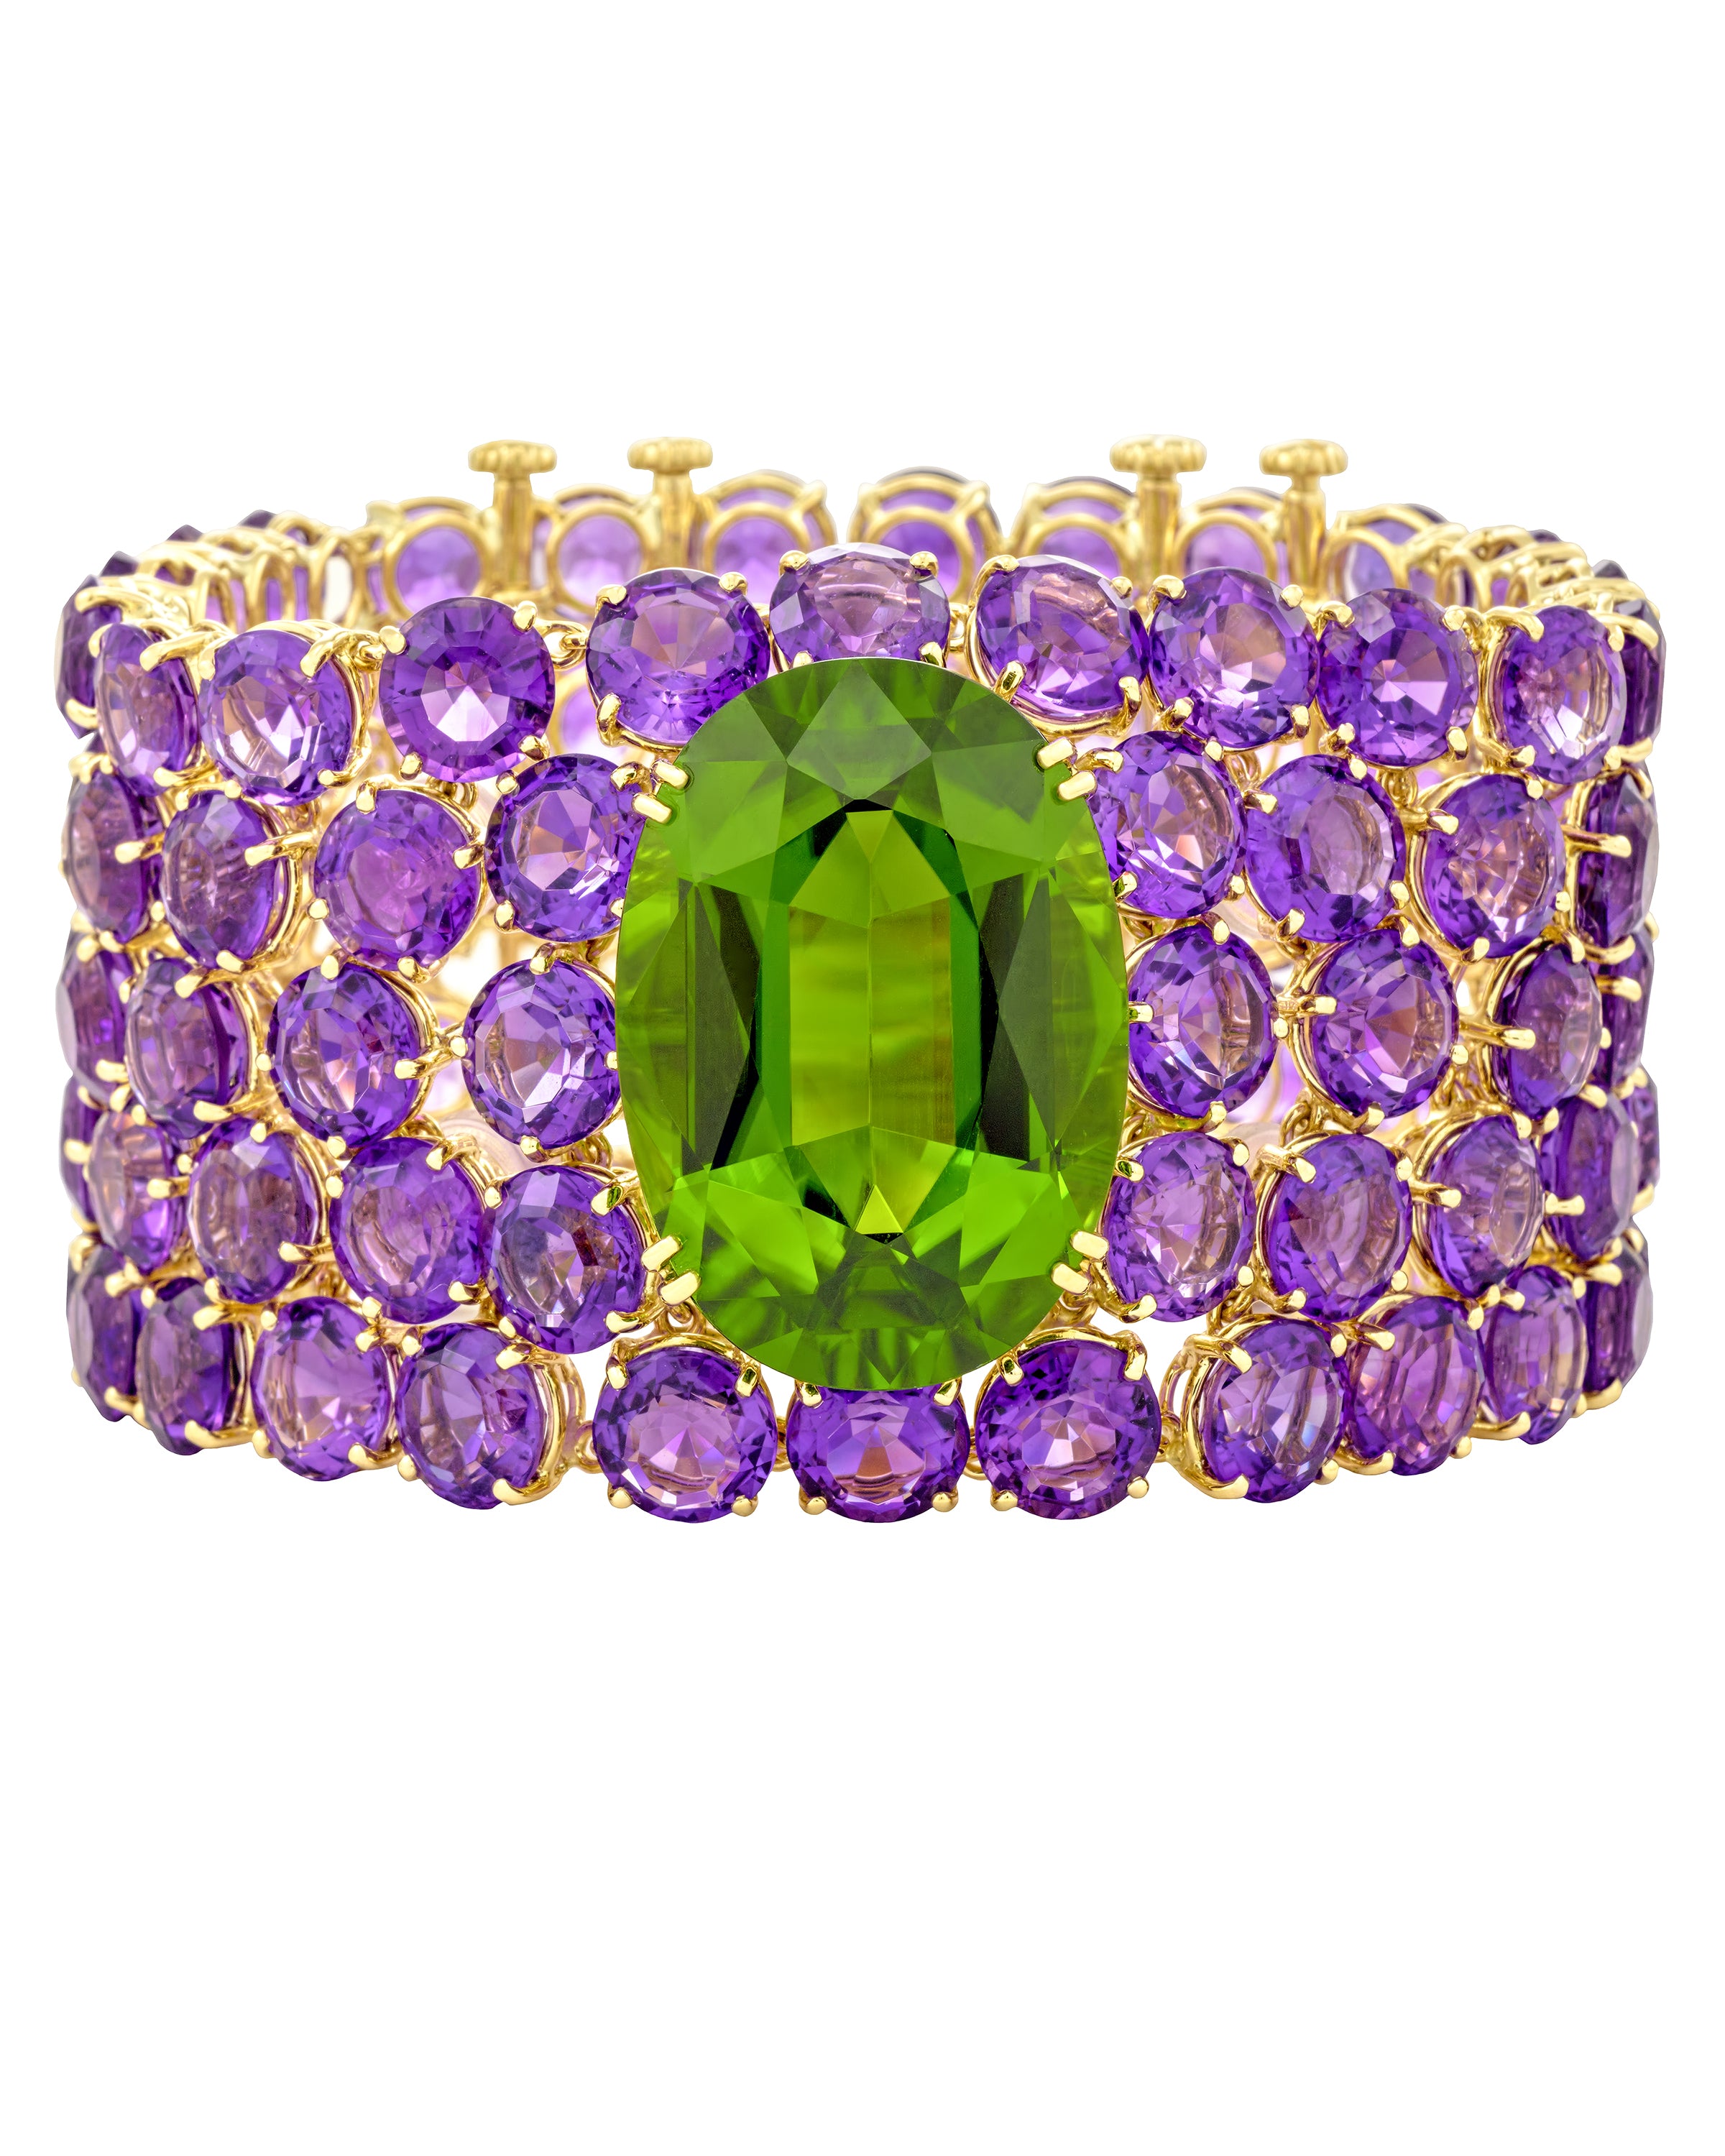 NYC Peridot cuff with amethyst, crafted in 18 karat yellow gold.